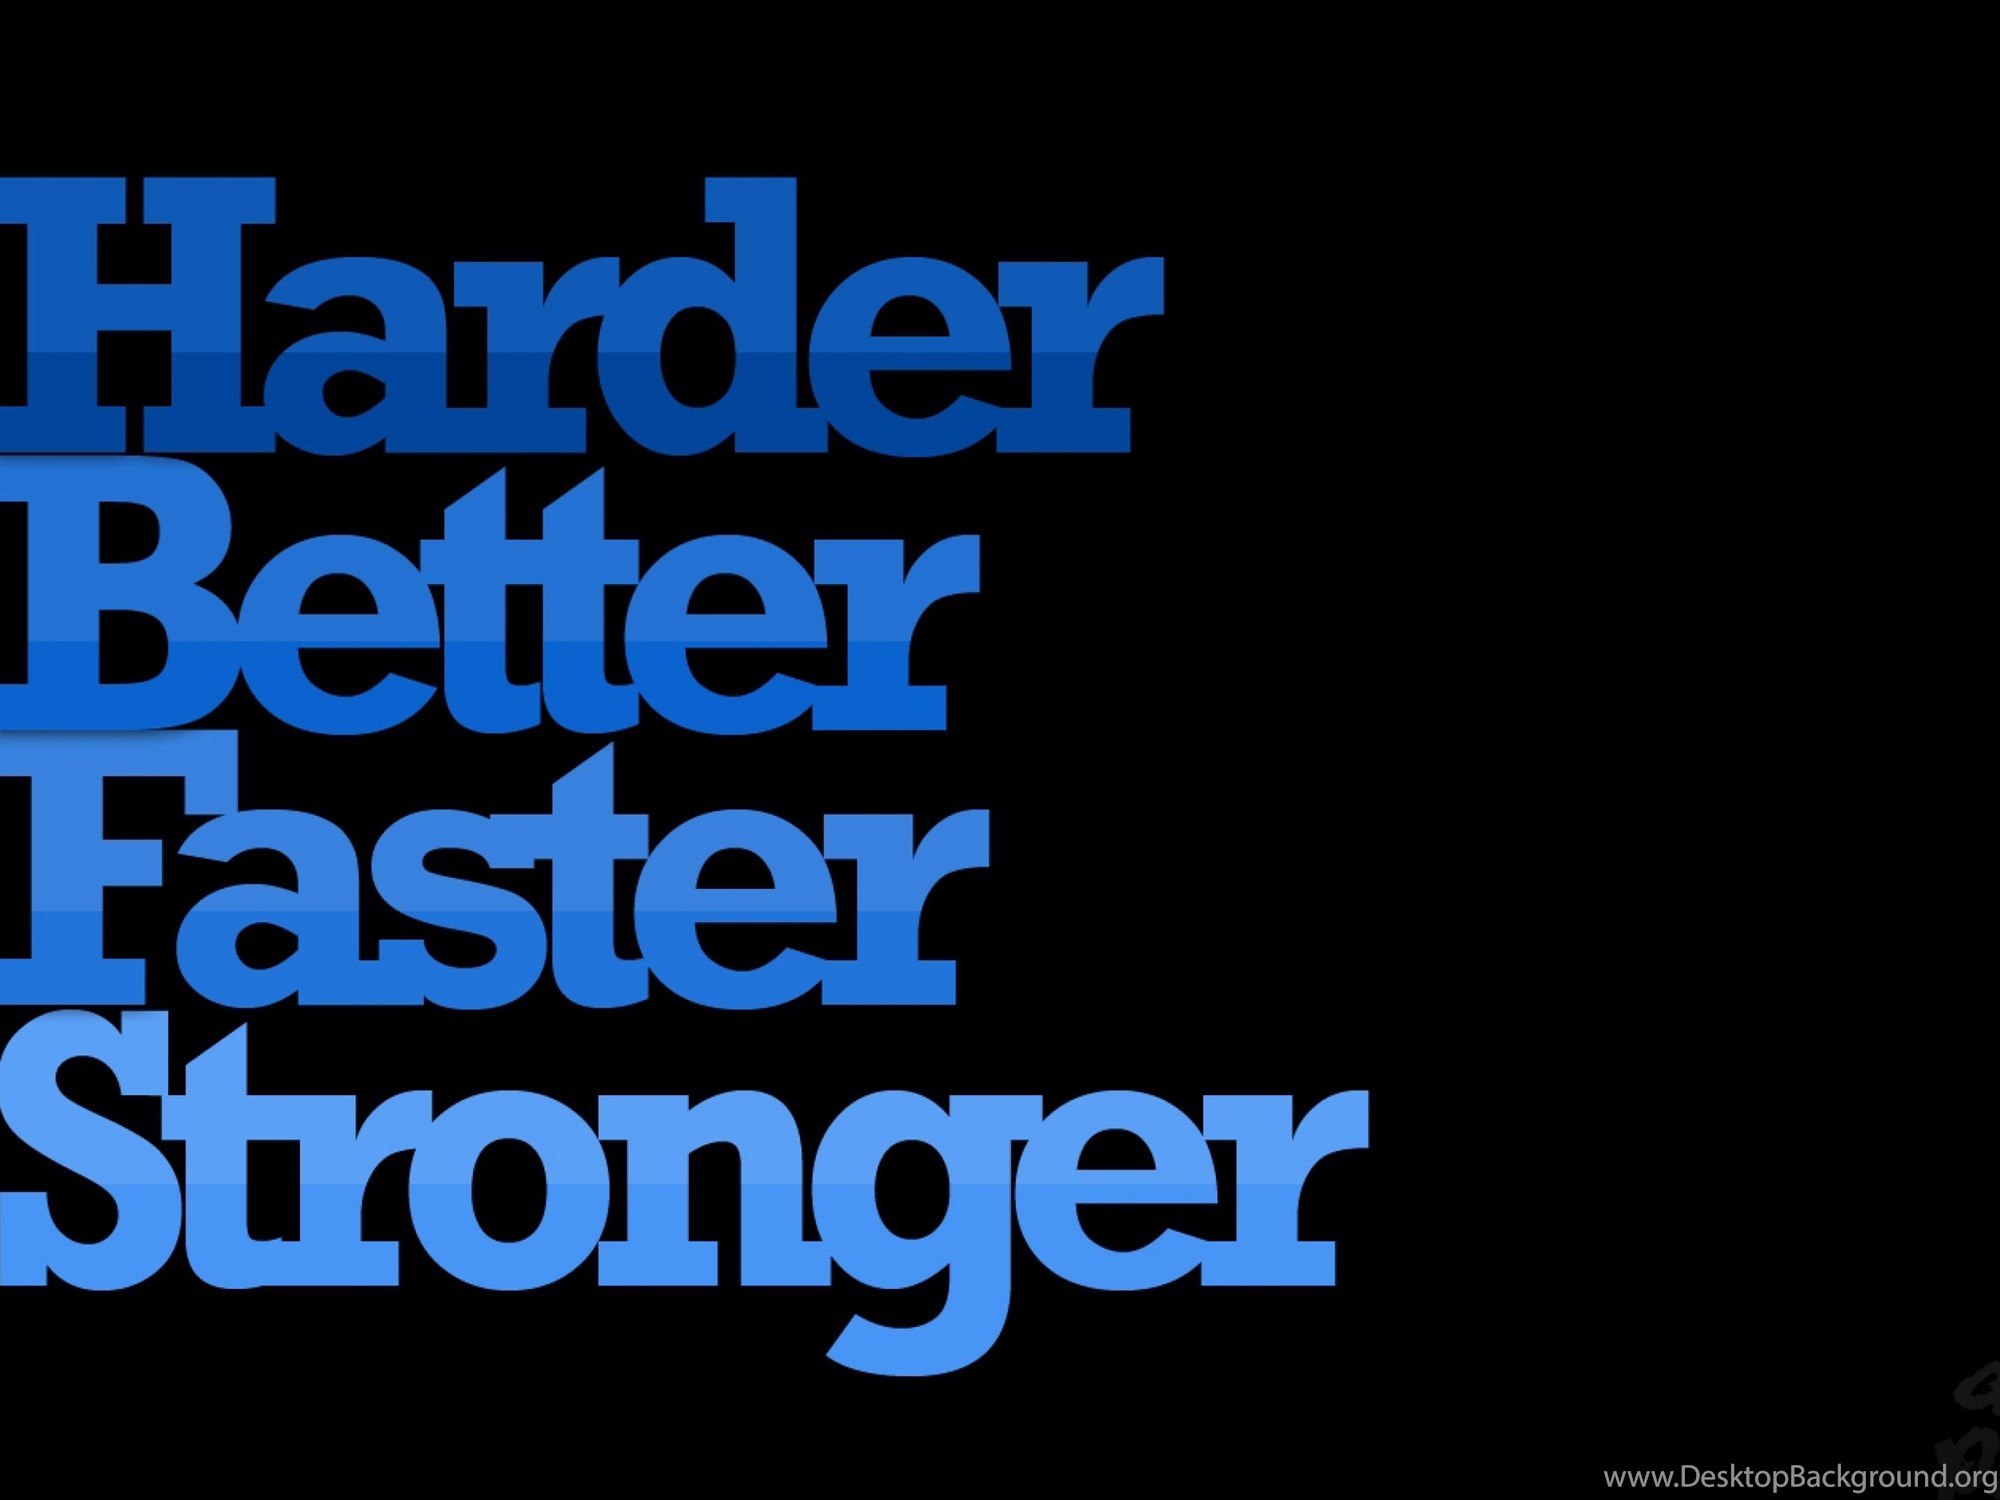 Faster and harder перевод. Harder better faster stronger. Harder better faster stronger обложка. Фирма better faster.